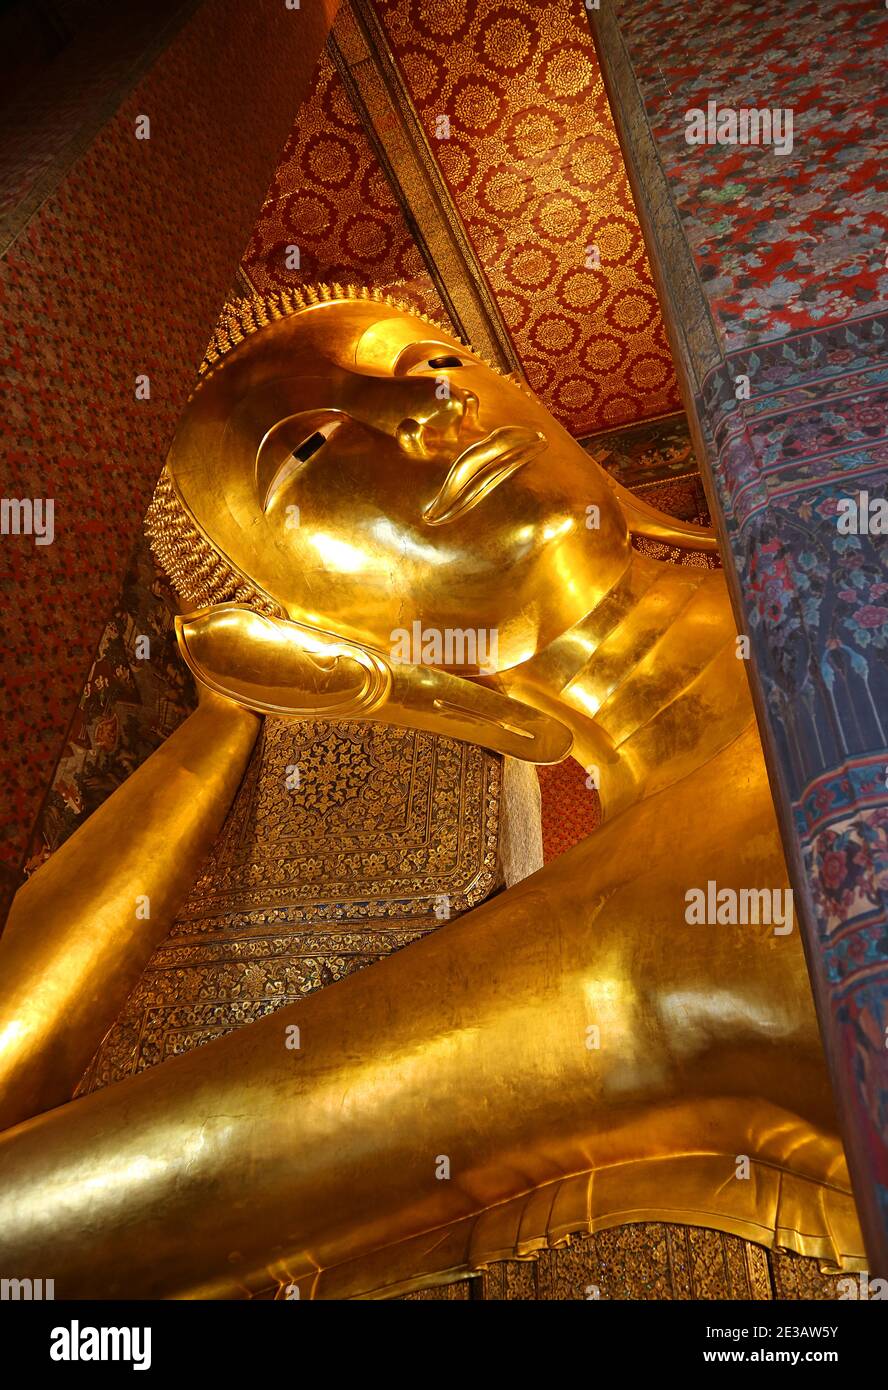 15 Meters High Gigantic Reclining Buddha Image of Wat Pho Temple Complex Located in Phra Nakhon District, Bangkok, Thailand Stock Photo